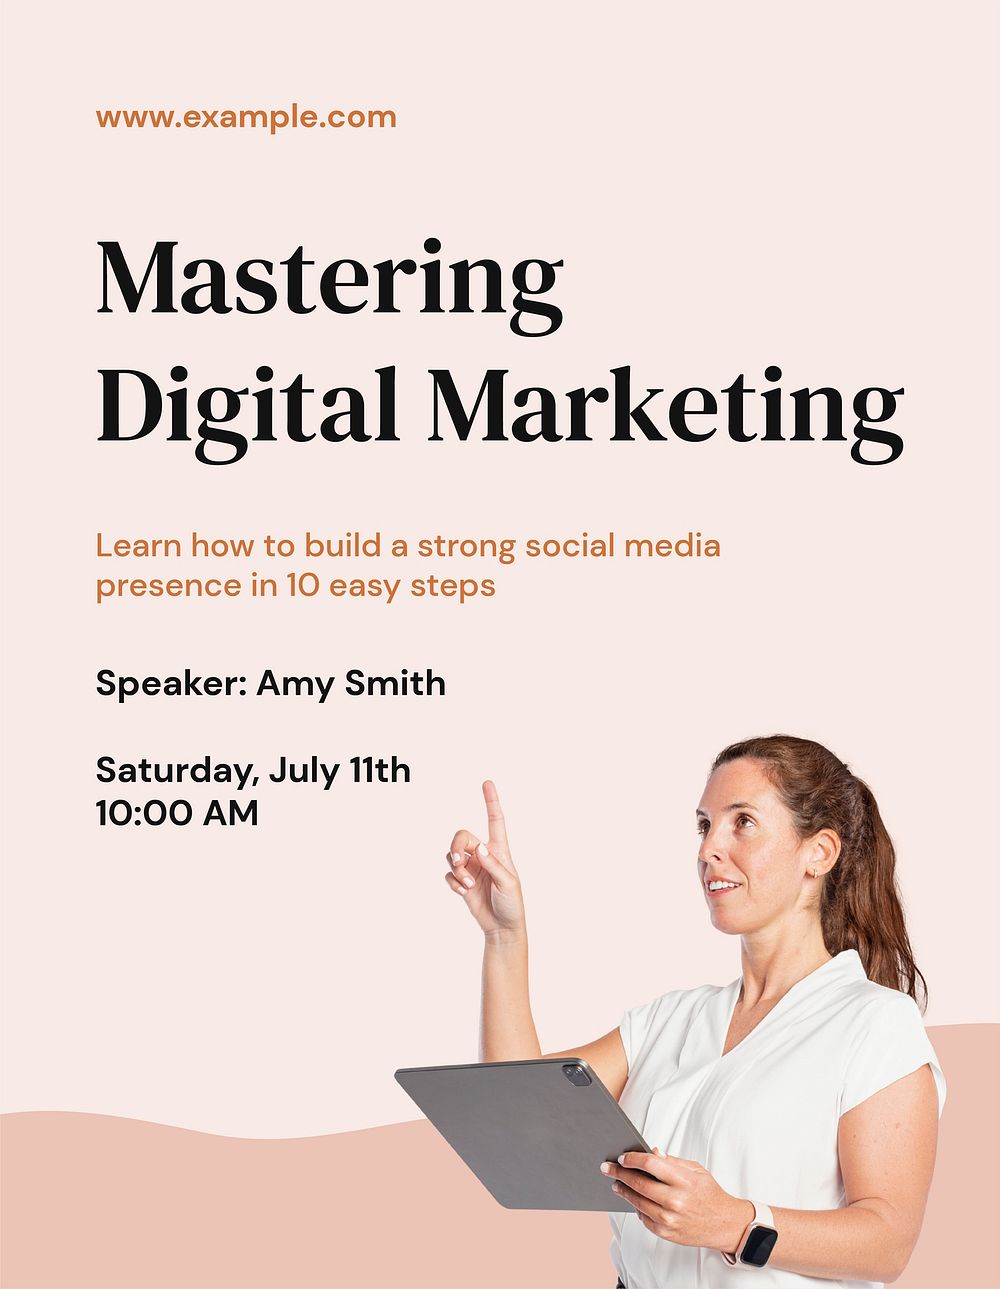 Digital Marketing course template, ad poster psd